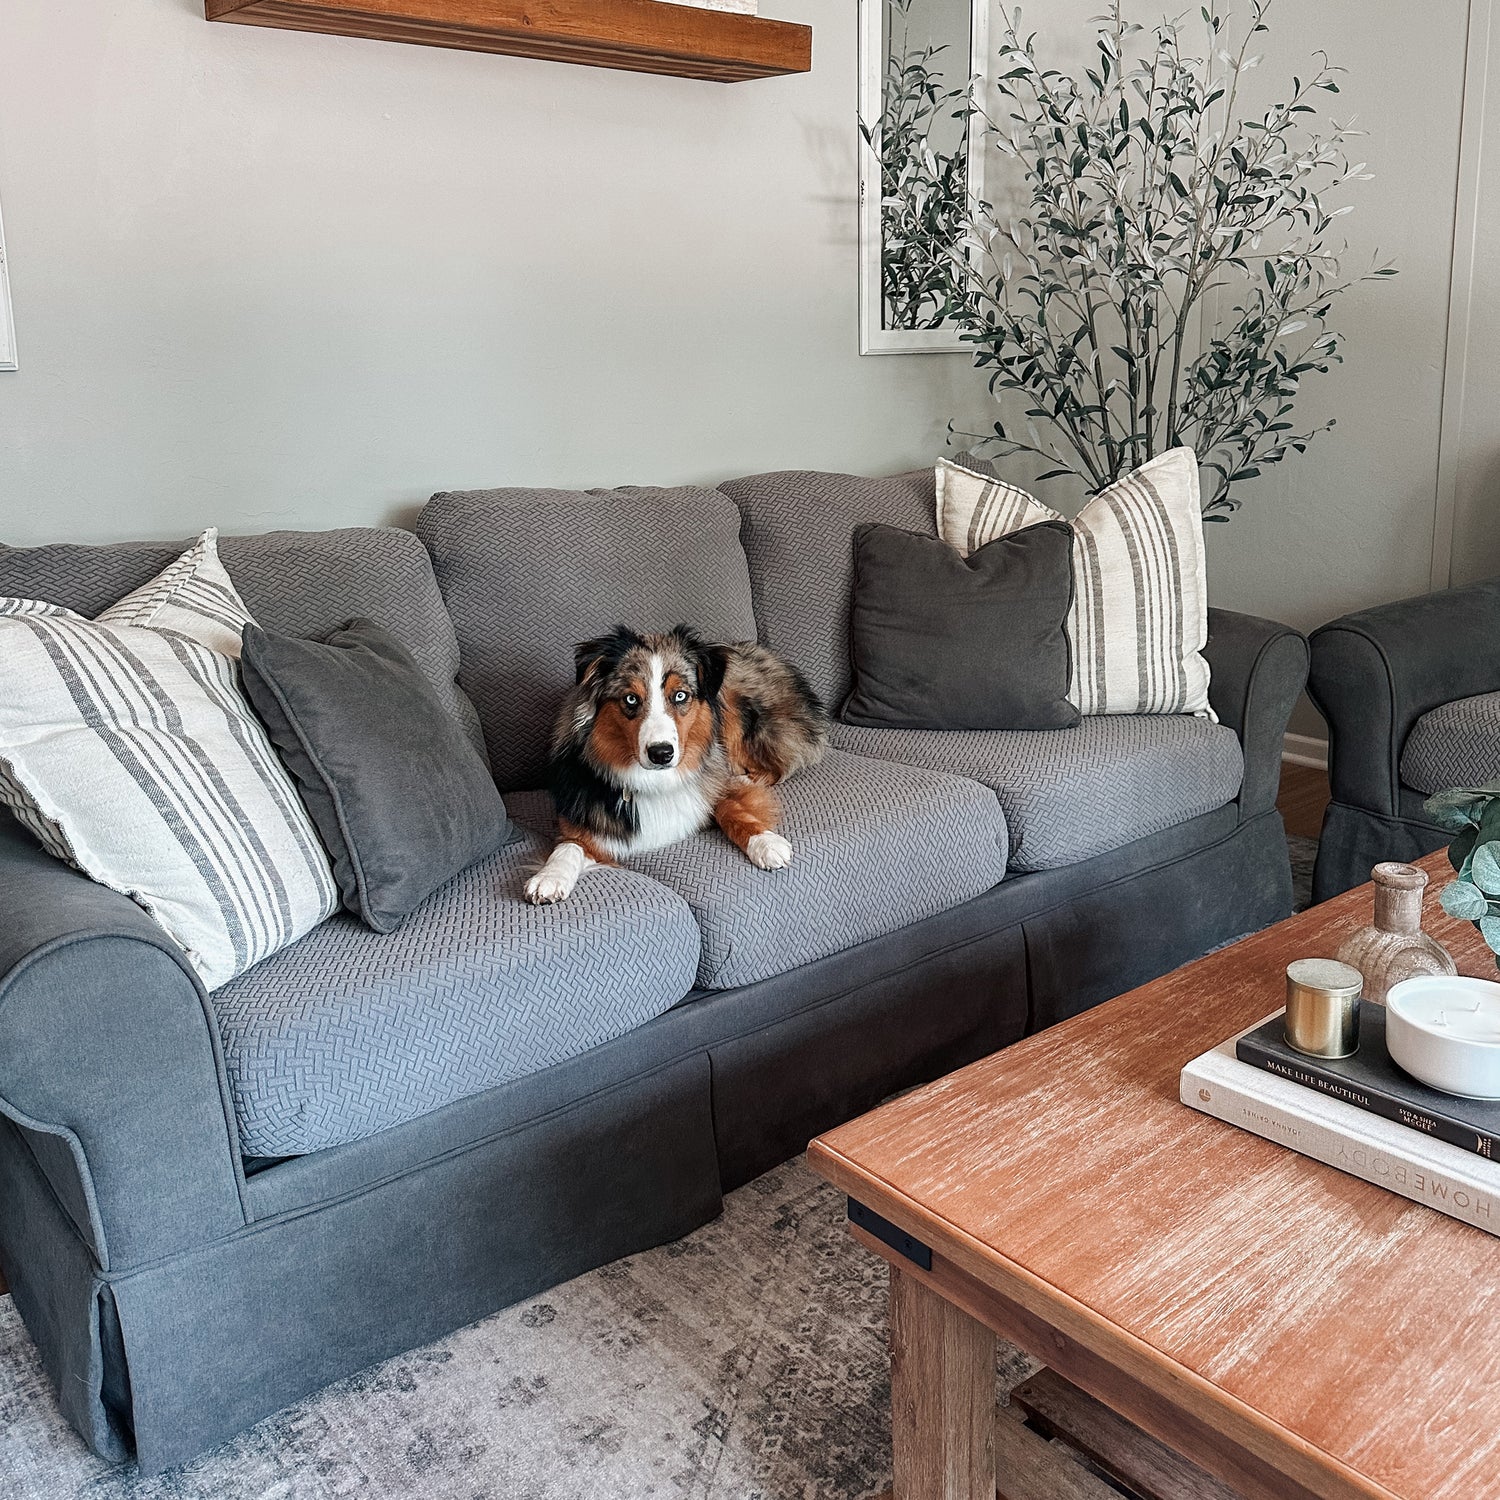 Dog-proofing Your Furniture: How to Protect Your Couch from Your Dog